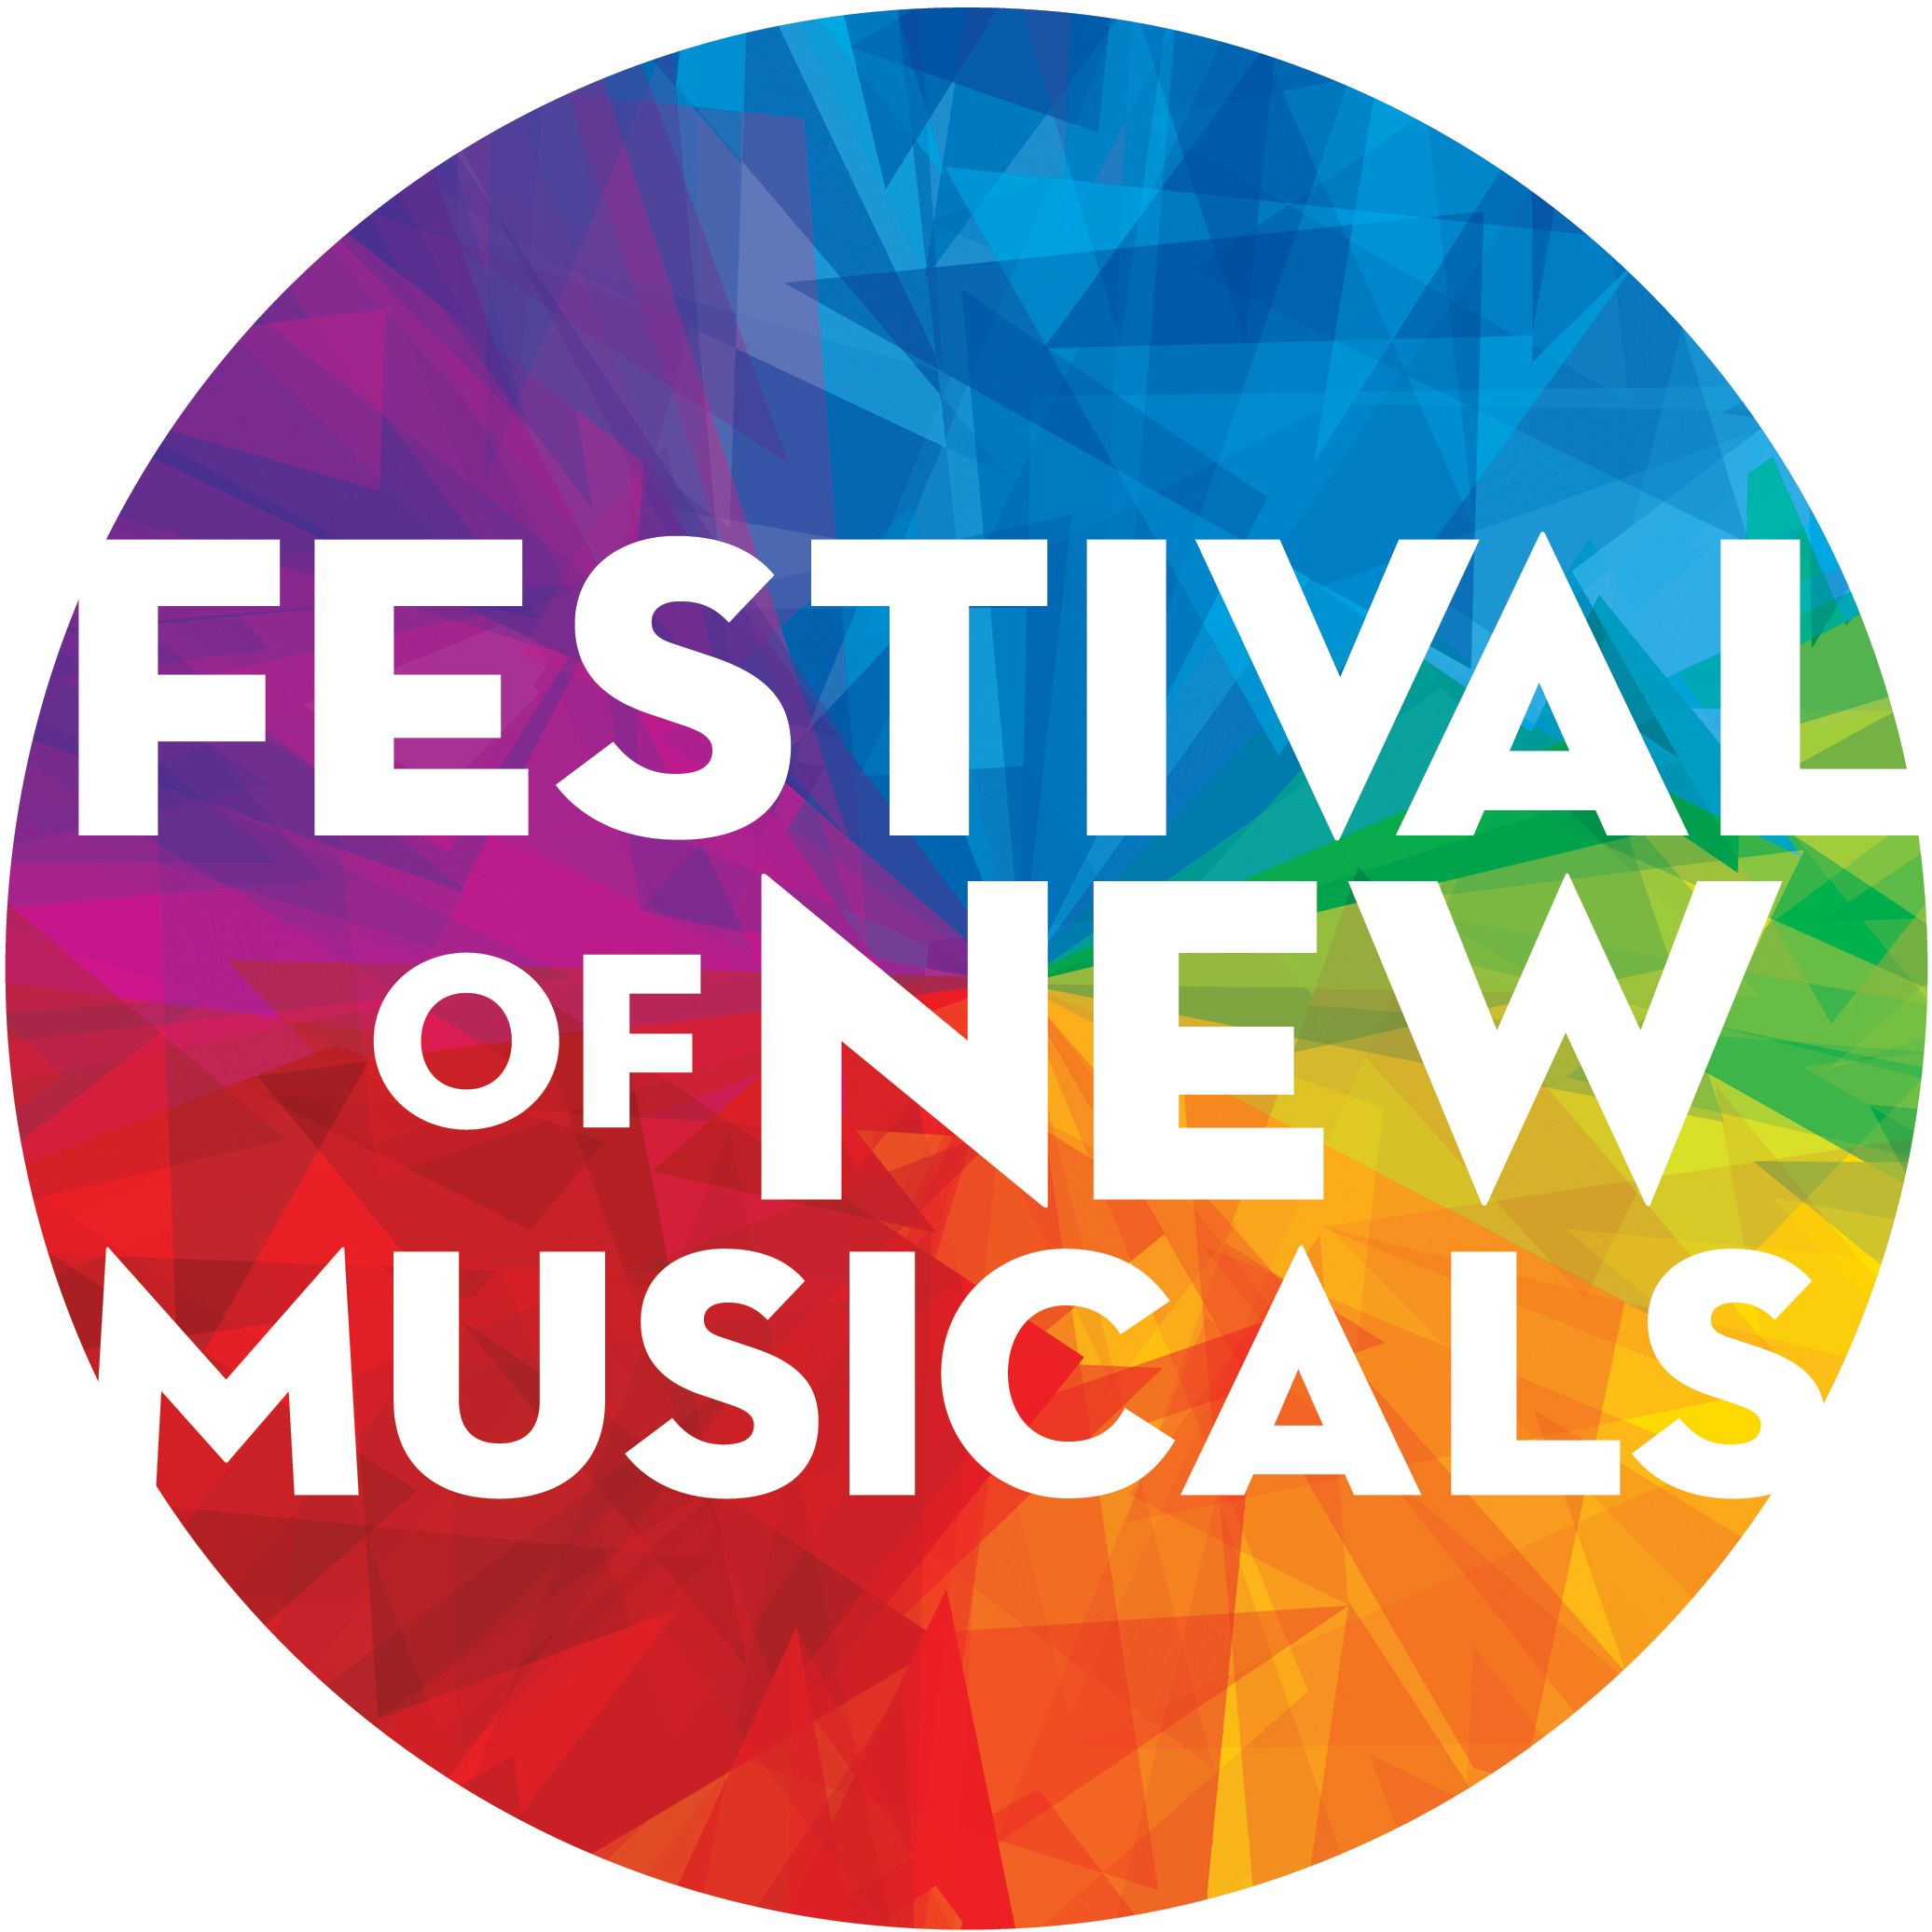 Festival of New Musicals